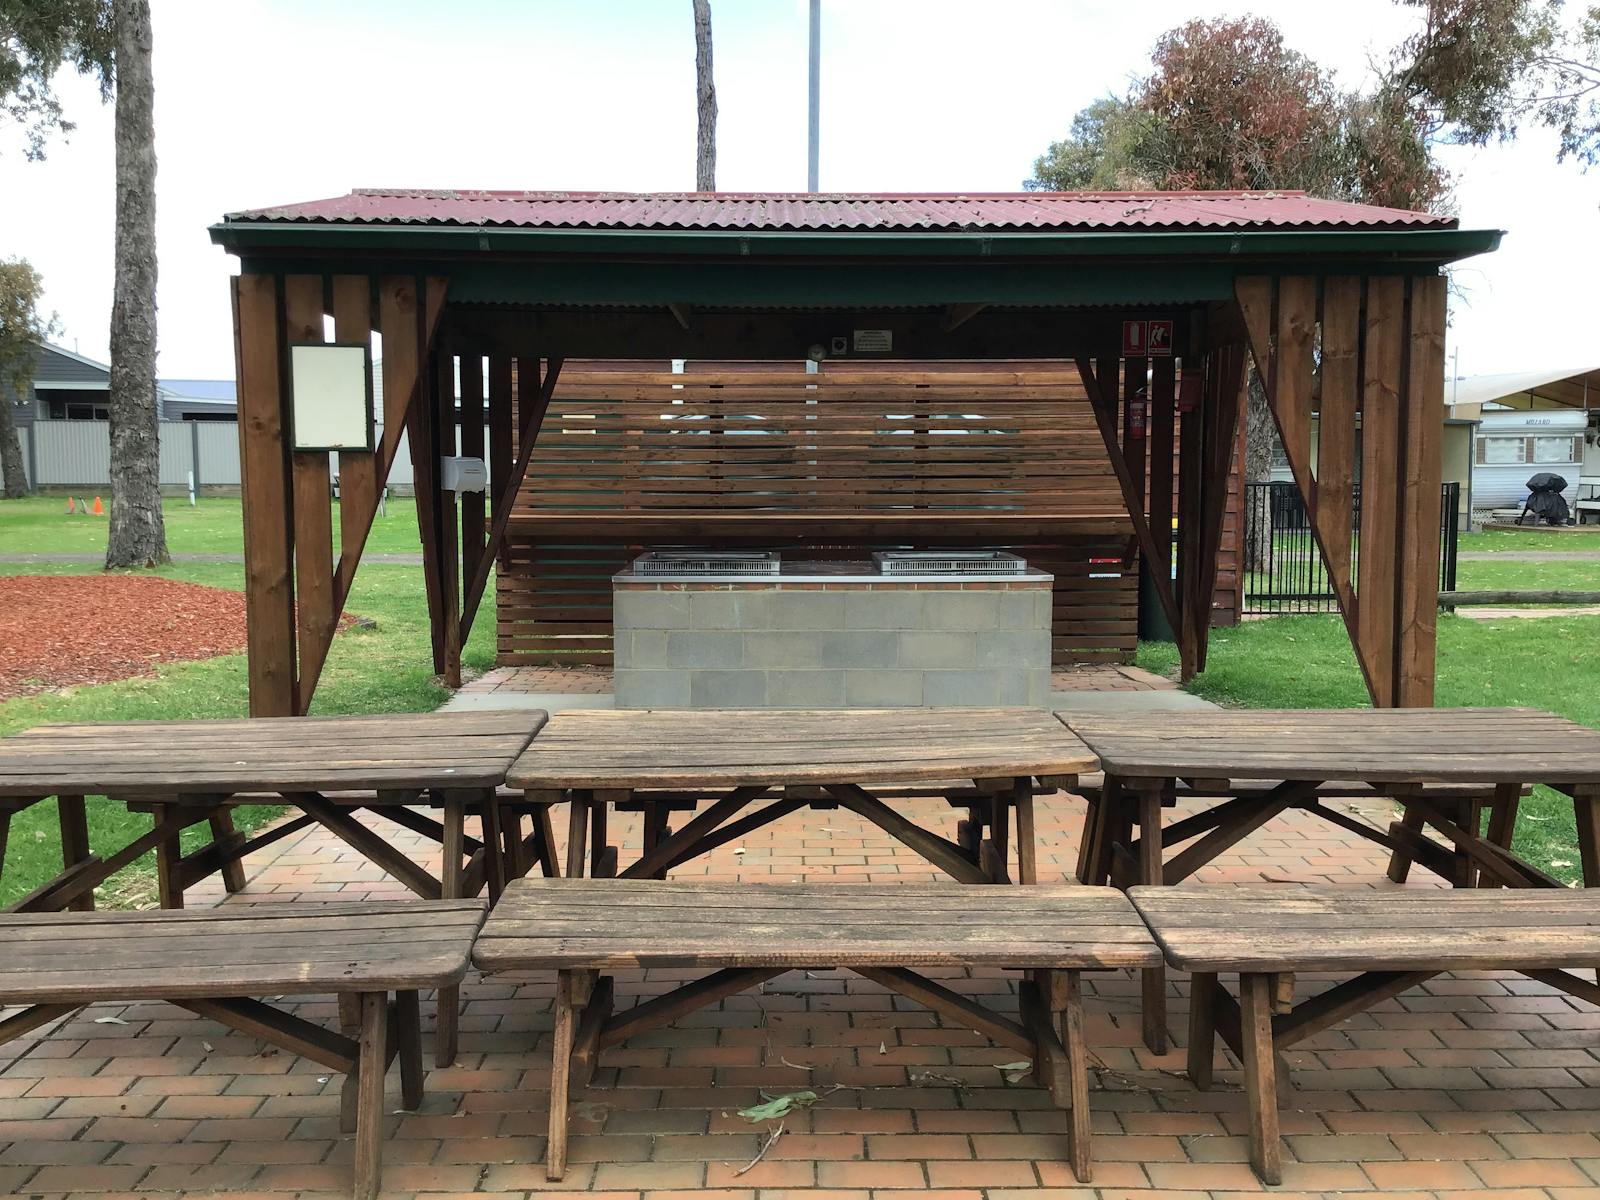 Covered BBQ area with tables and chairs